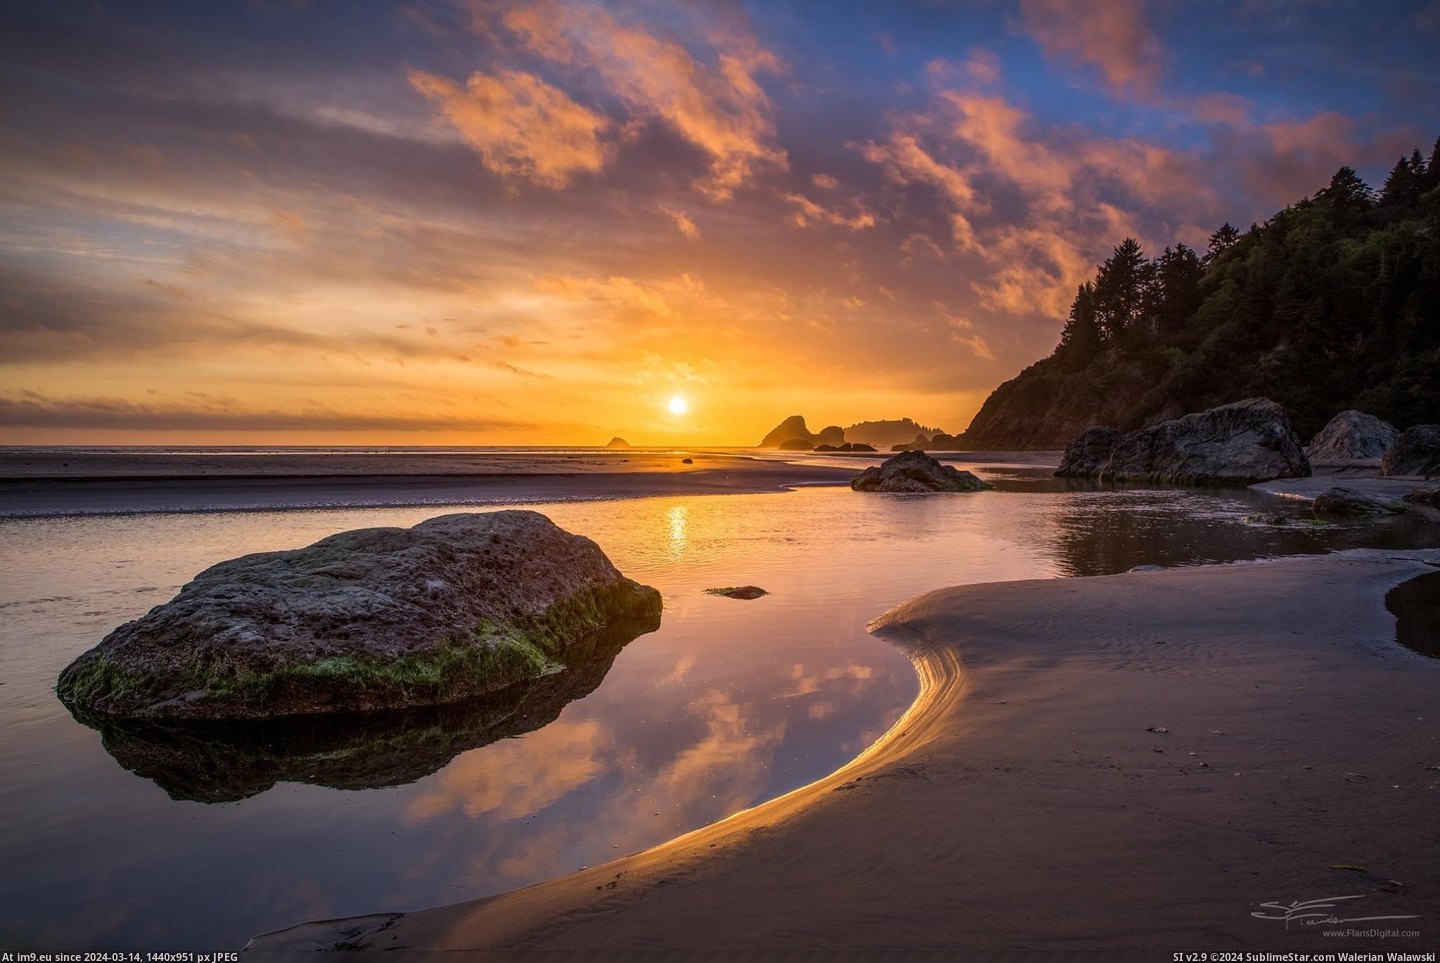 #Beach #Sunset #River #Perspective #Trinidad #2nd #Meets #2048x1365 [Earthporn] OC - 'Where River Meets Beach - 2nd Perspective' - Trinidad, CA - Moonstone Beach Sunset 6-3-15 [2048x1365] Pic. (Image of album My r/EARTHPORN favs))